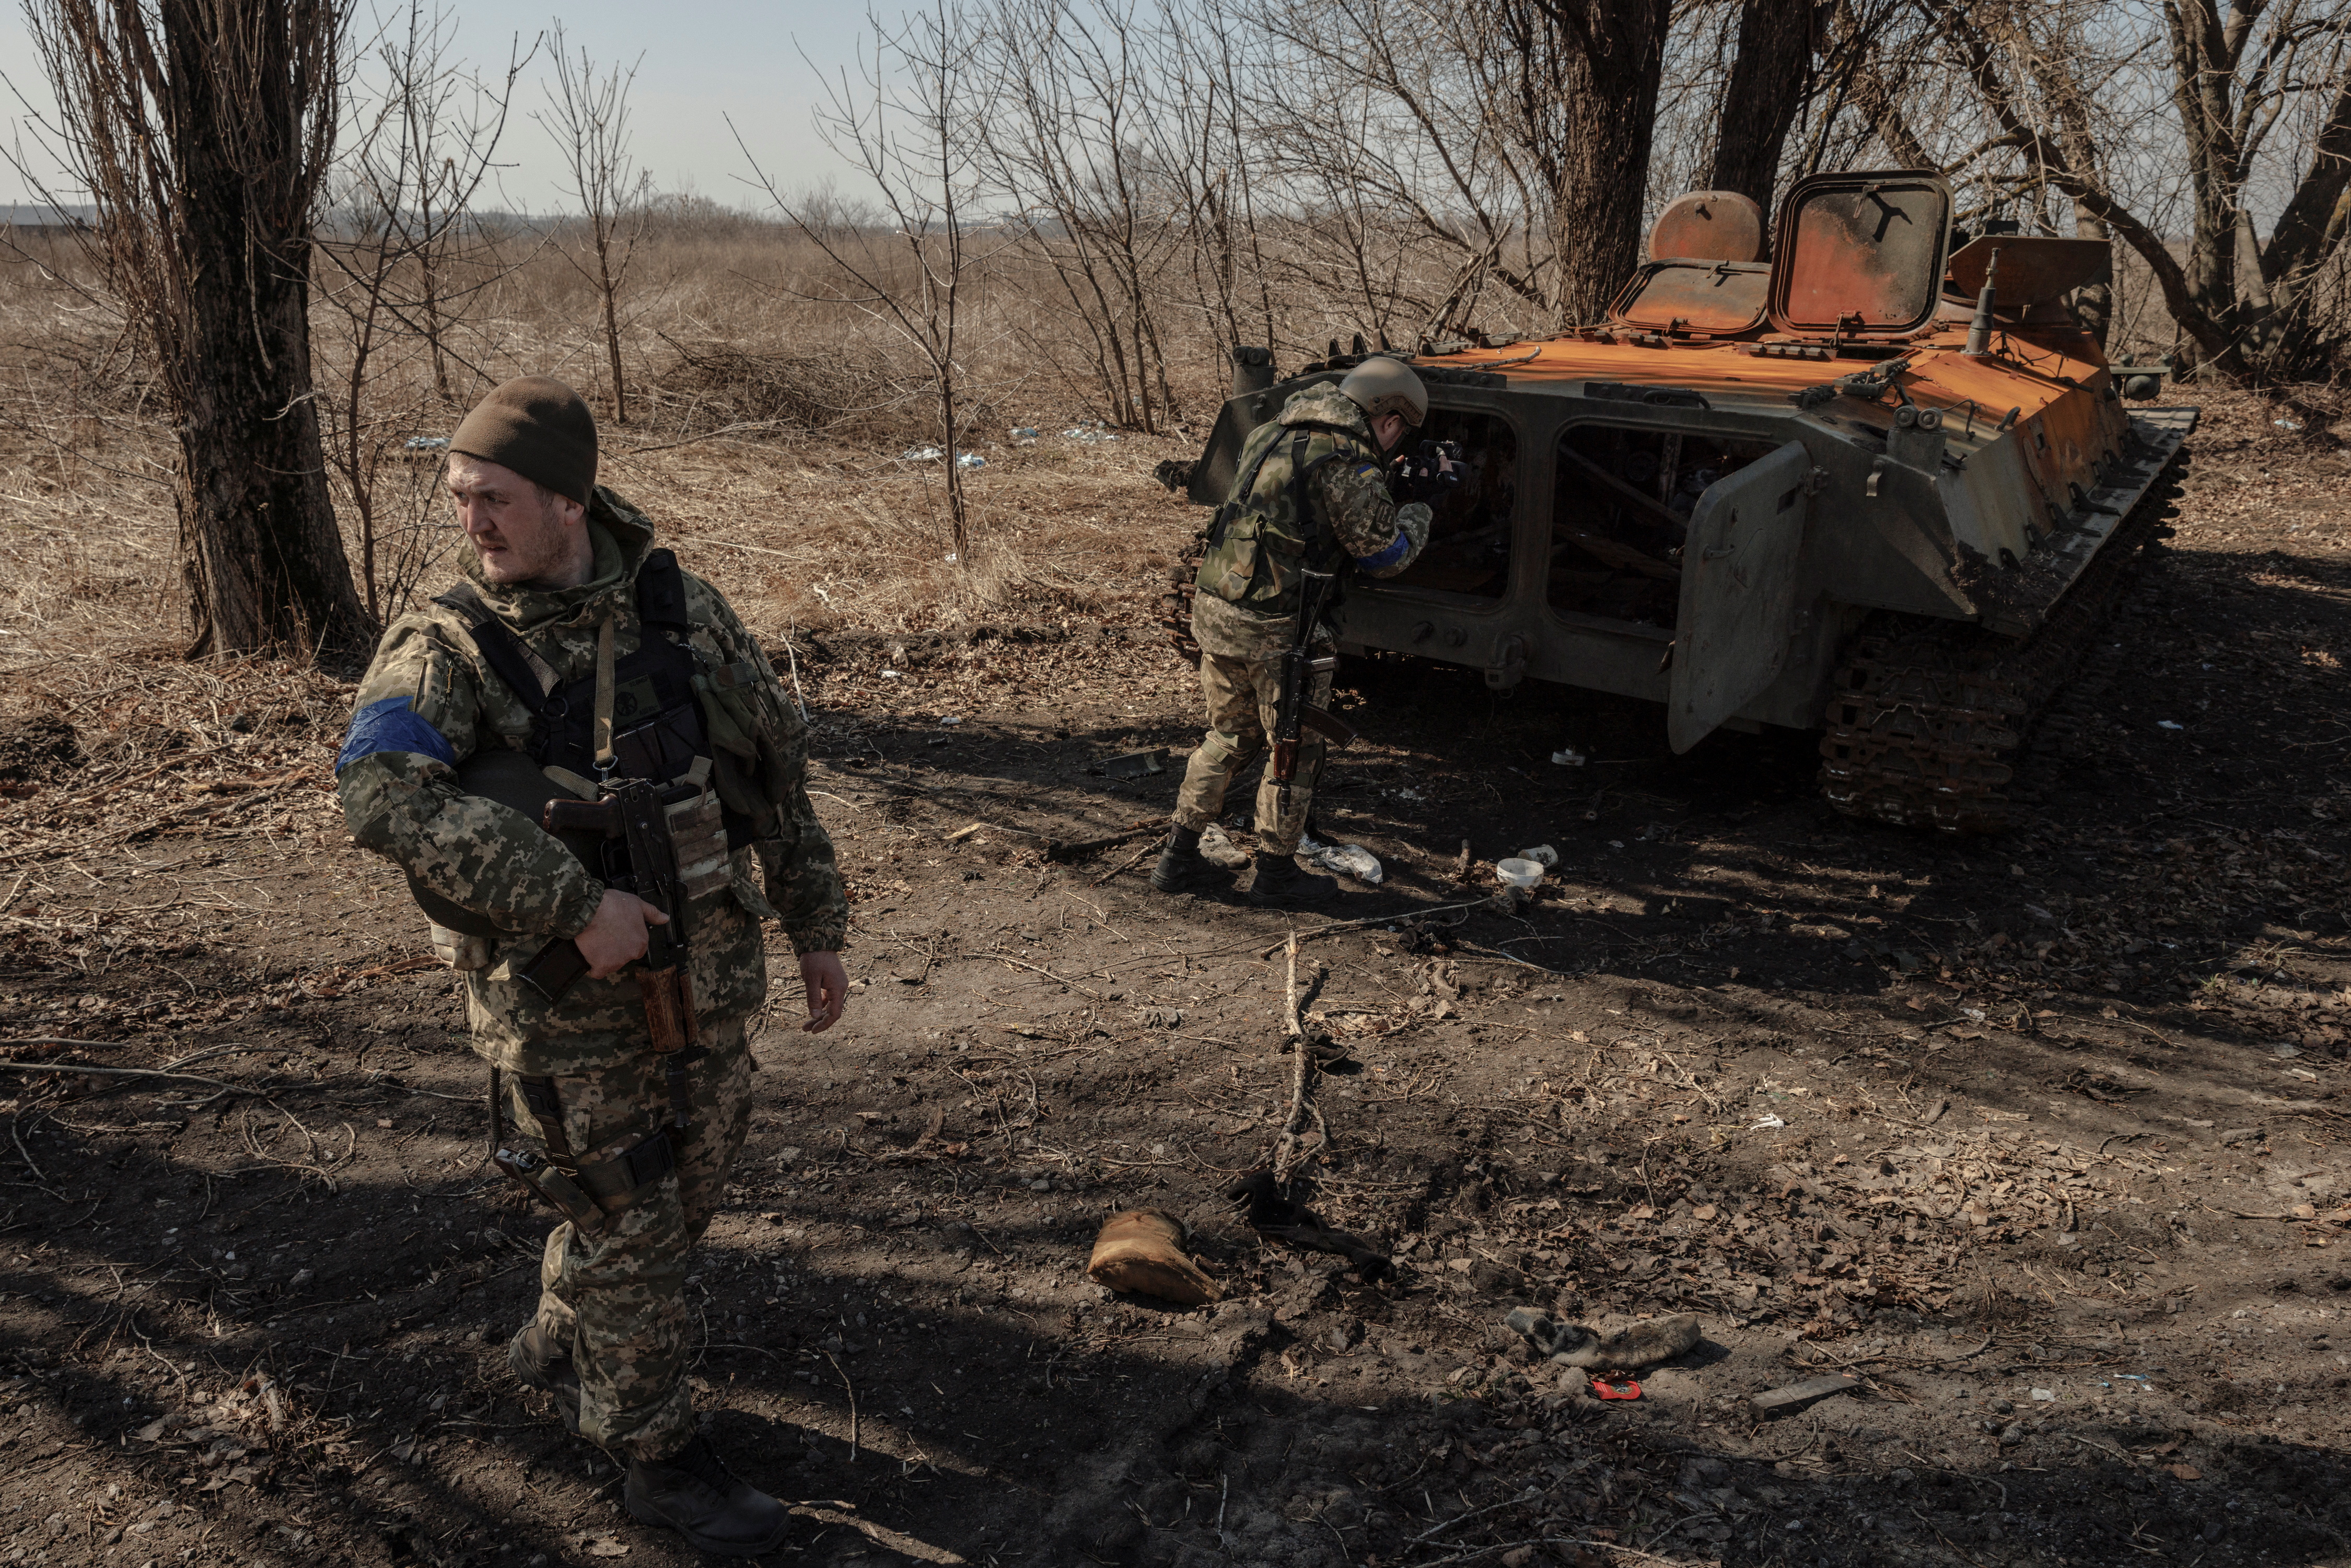 Ukrainian soldiers stand near a wrecked Russian armoured vehicle after a battle between Ukrainian and Russian troops outside Kharkiv